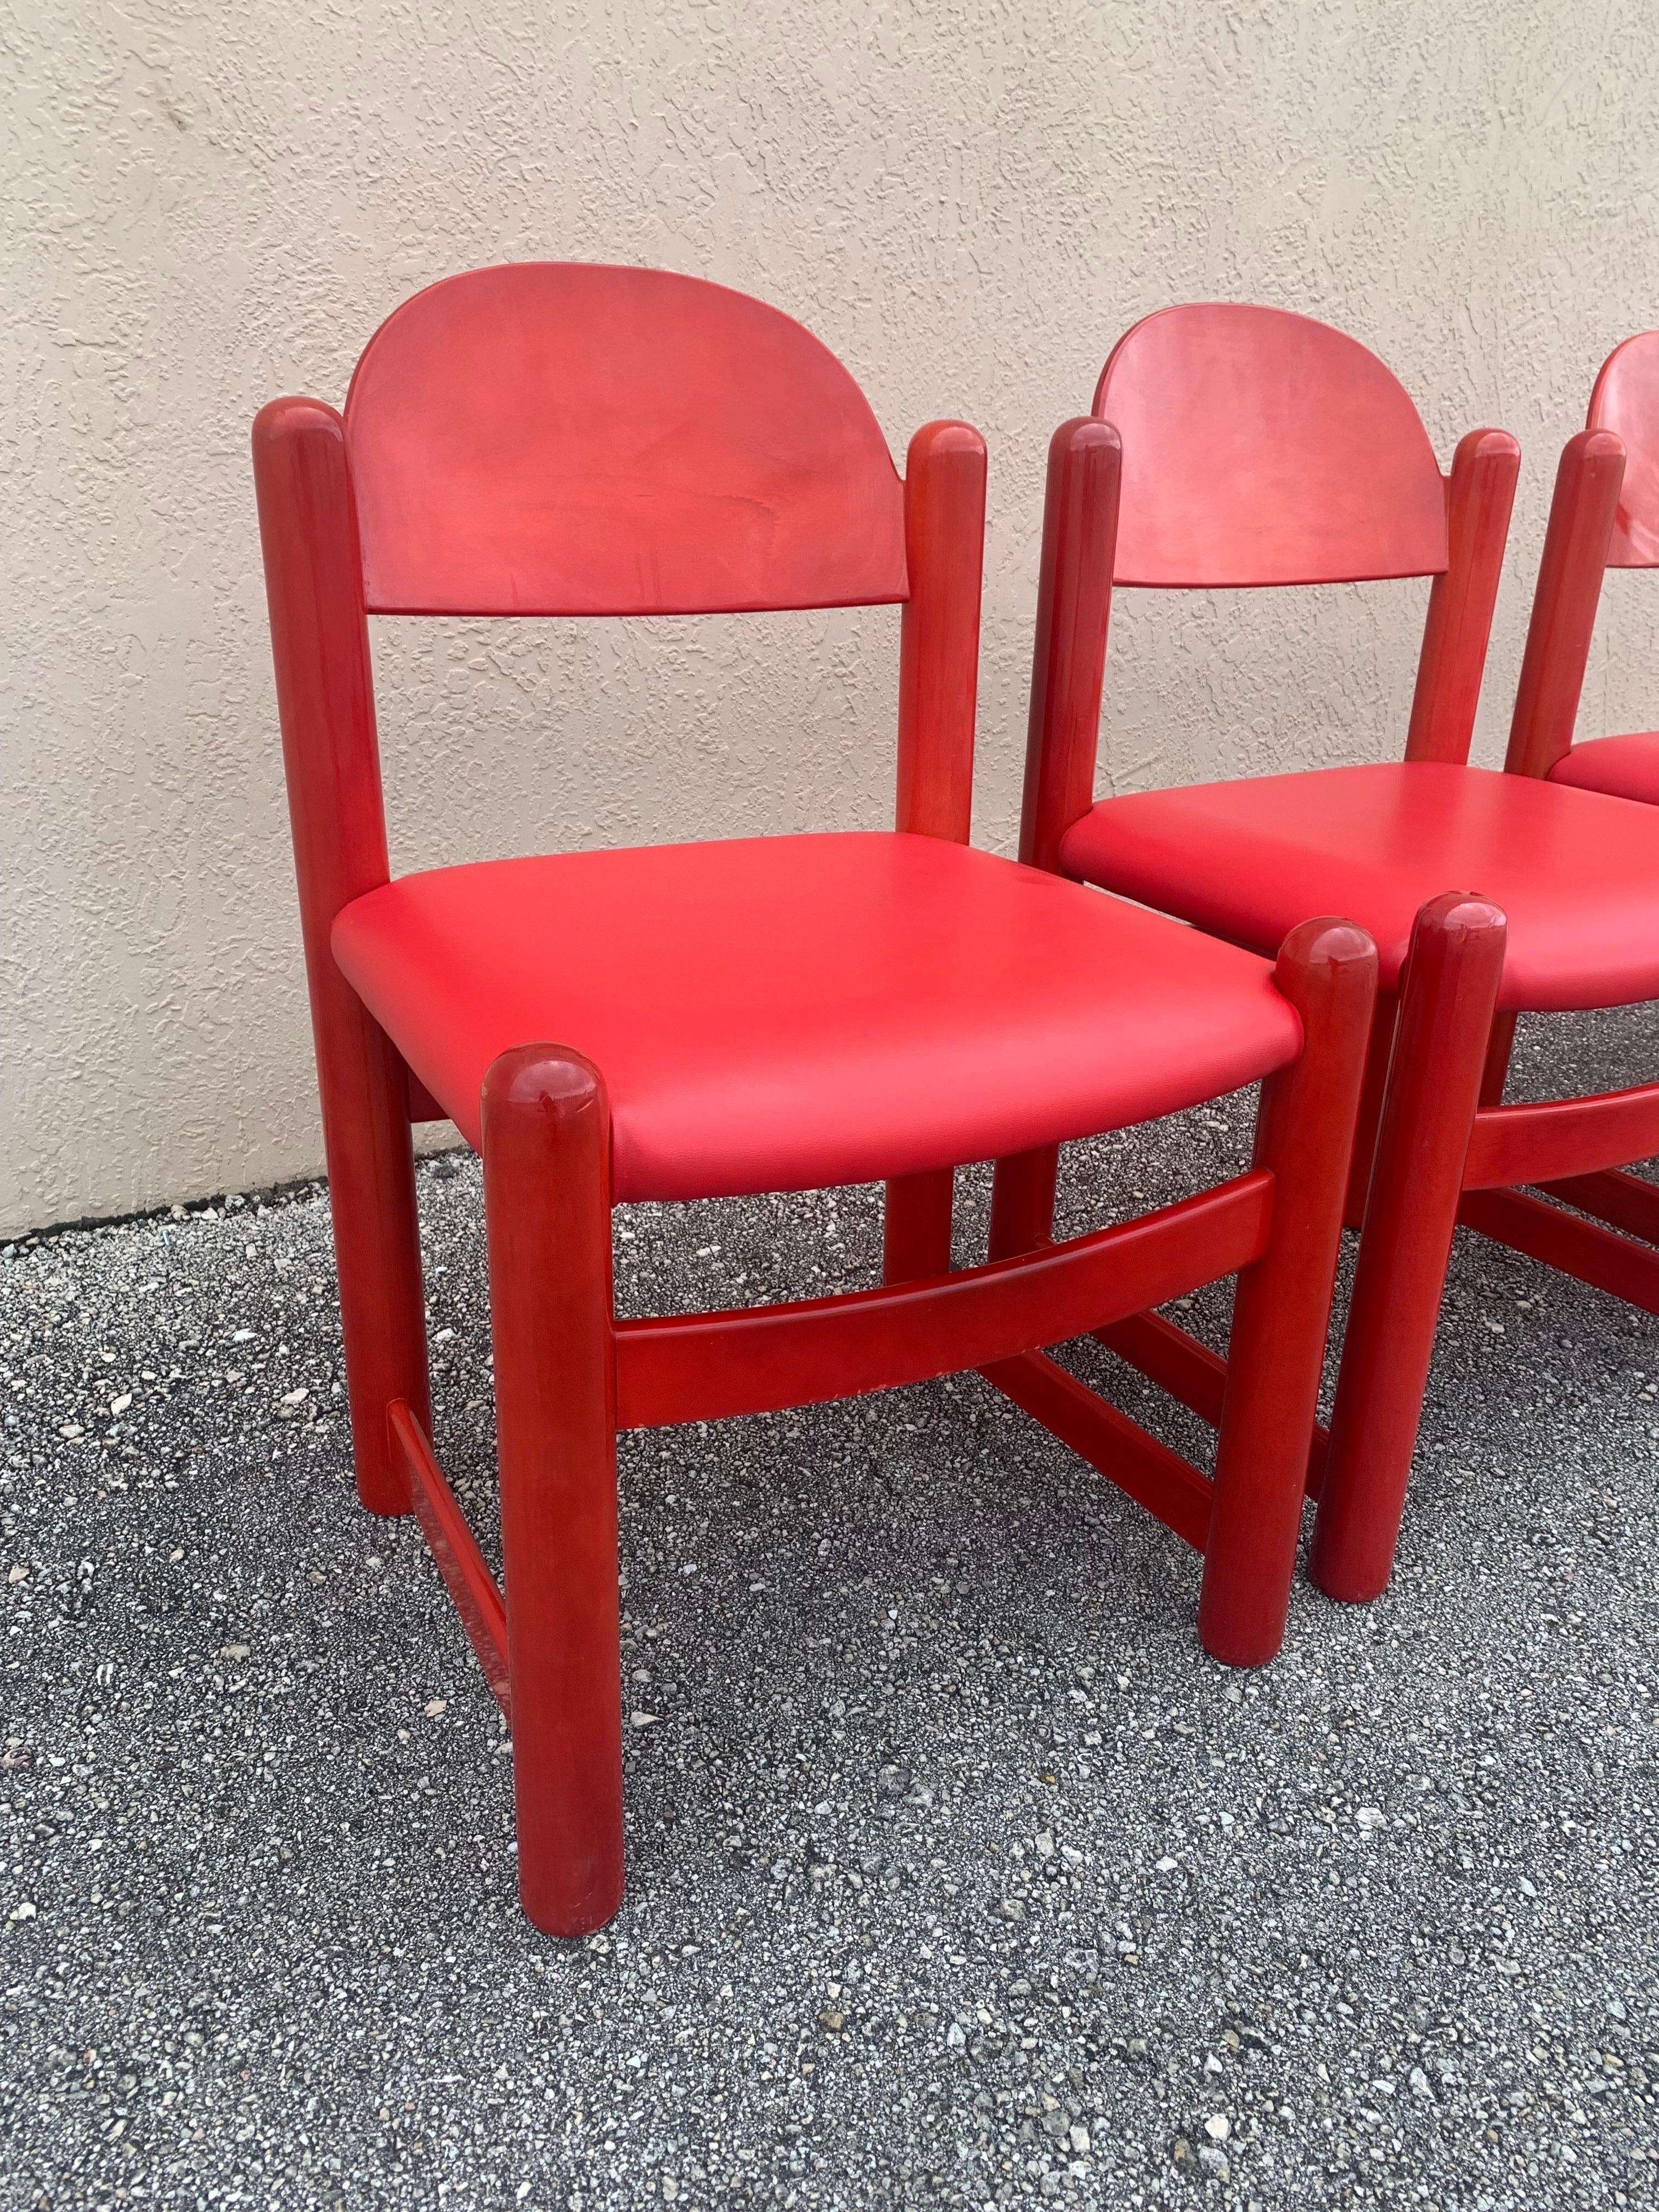 Hank Loewenstein Oak and Leather Chairs in Red, 1970s For Sale 1